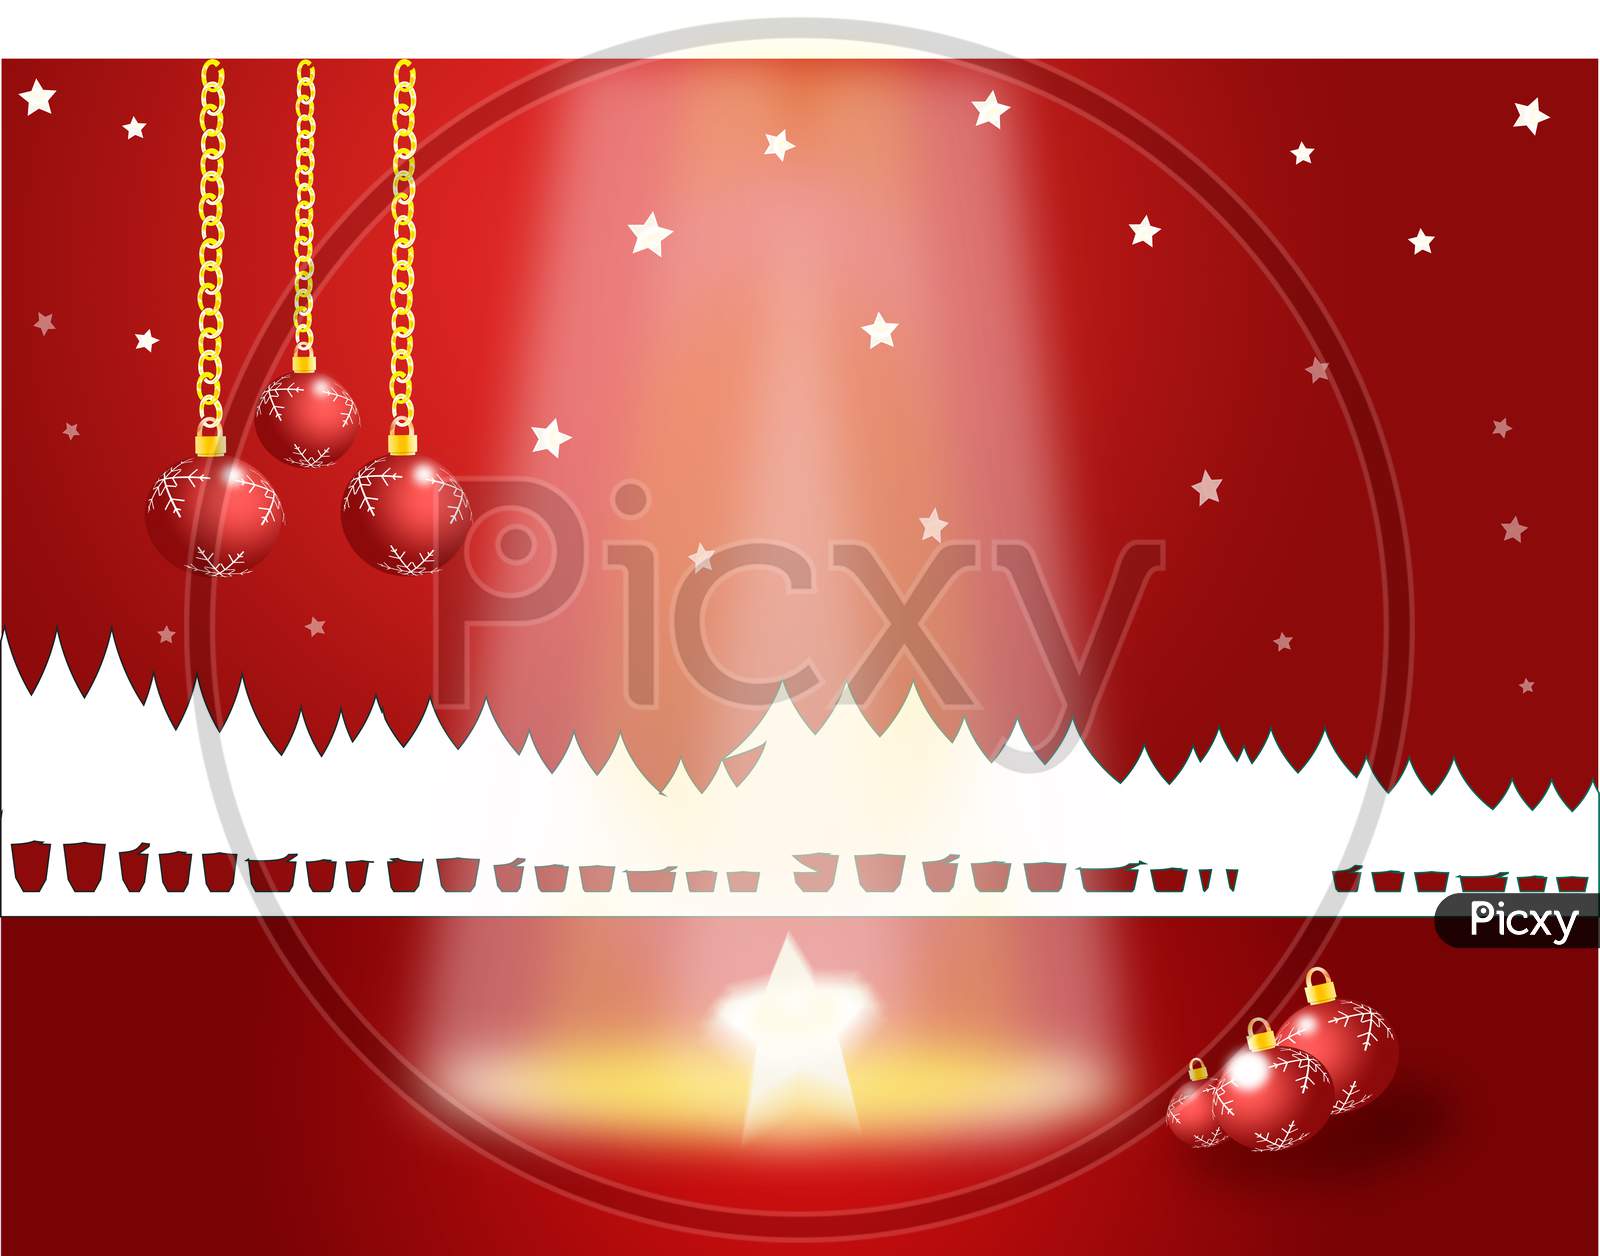 Christmas background with tree and ornaments with the ray of light coming from the heaven to give gifts.